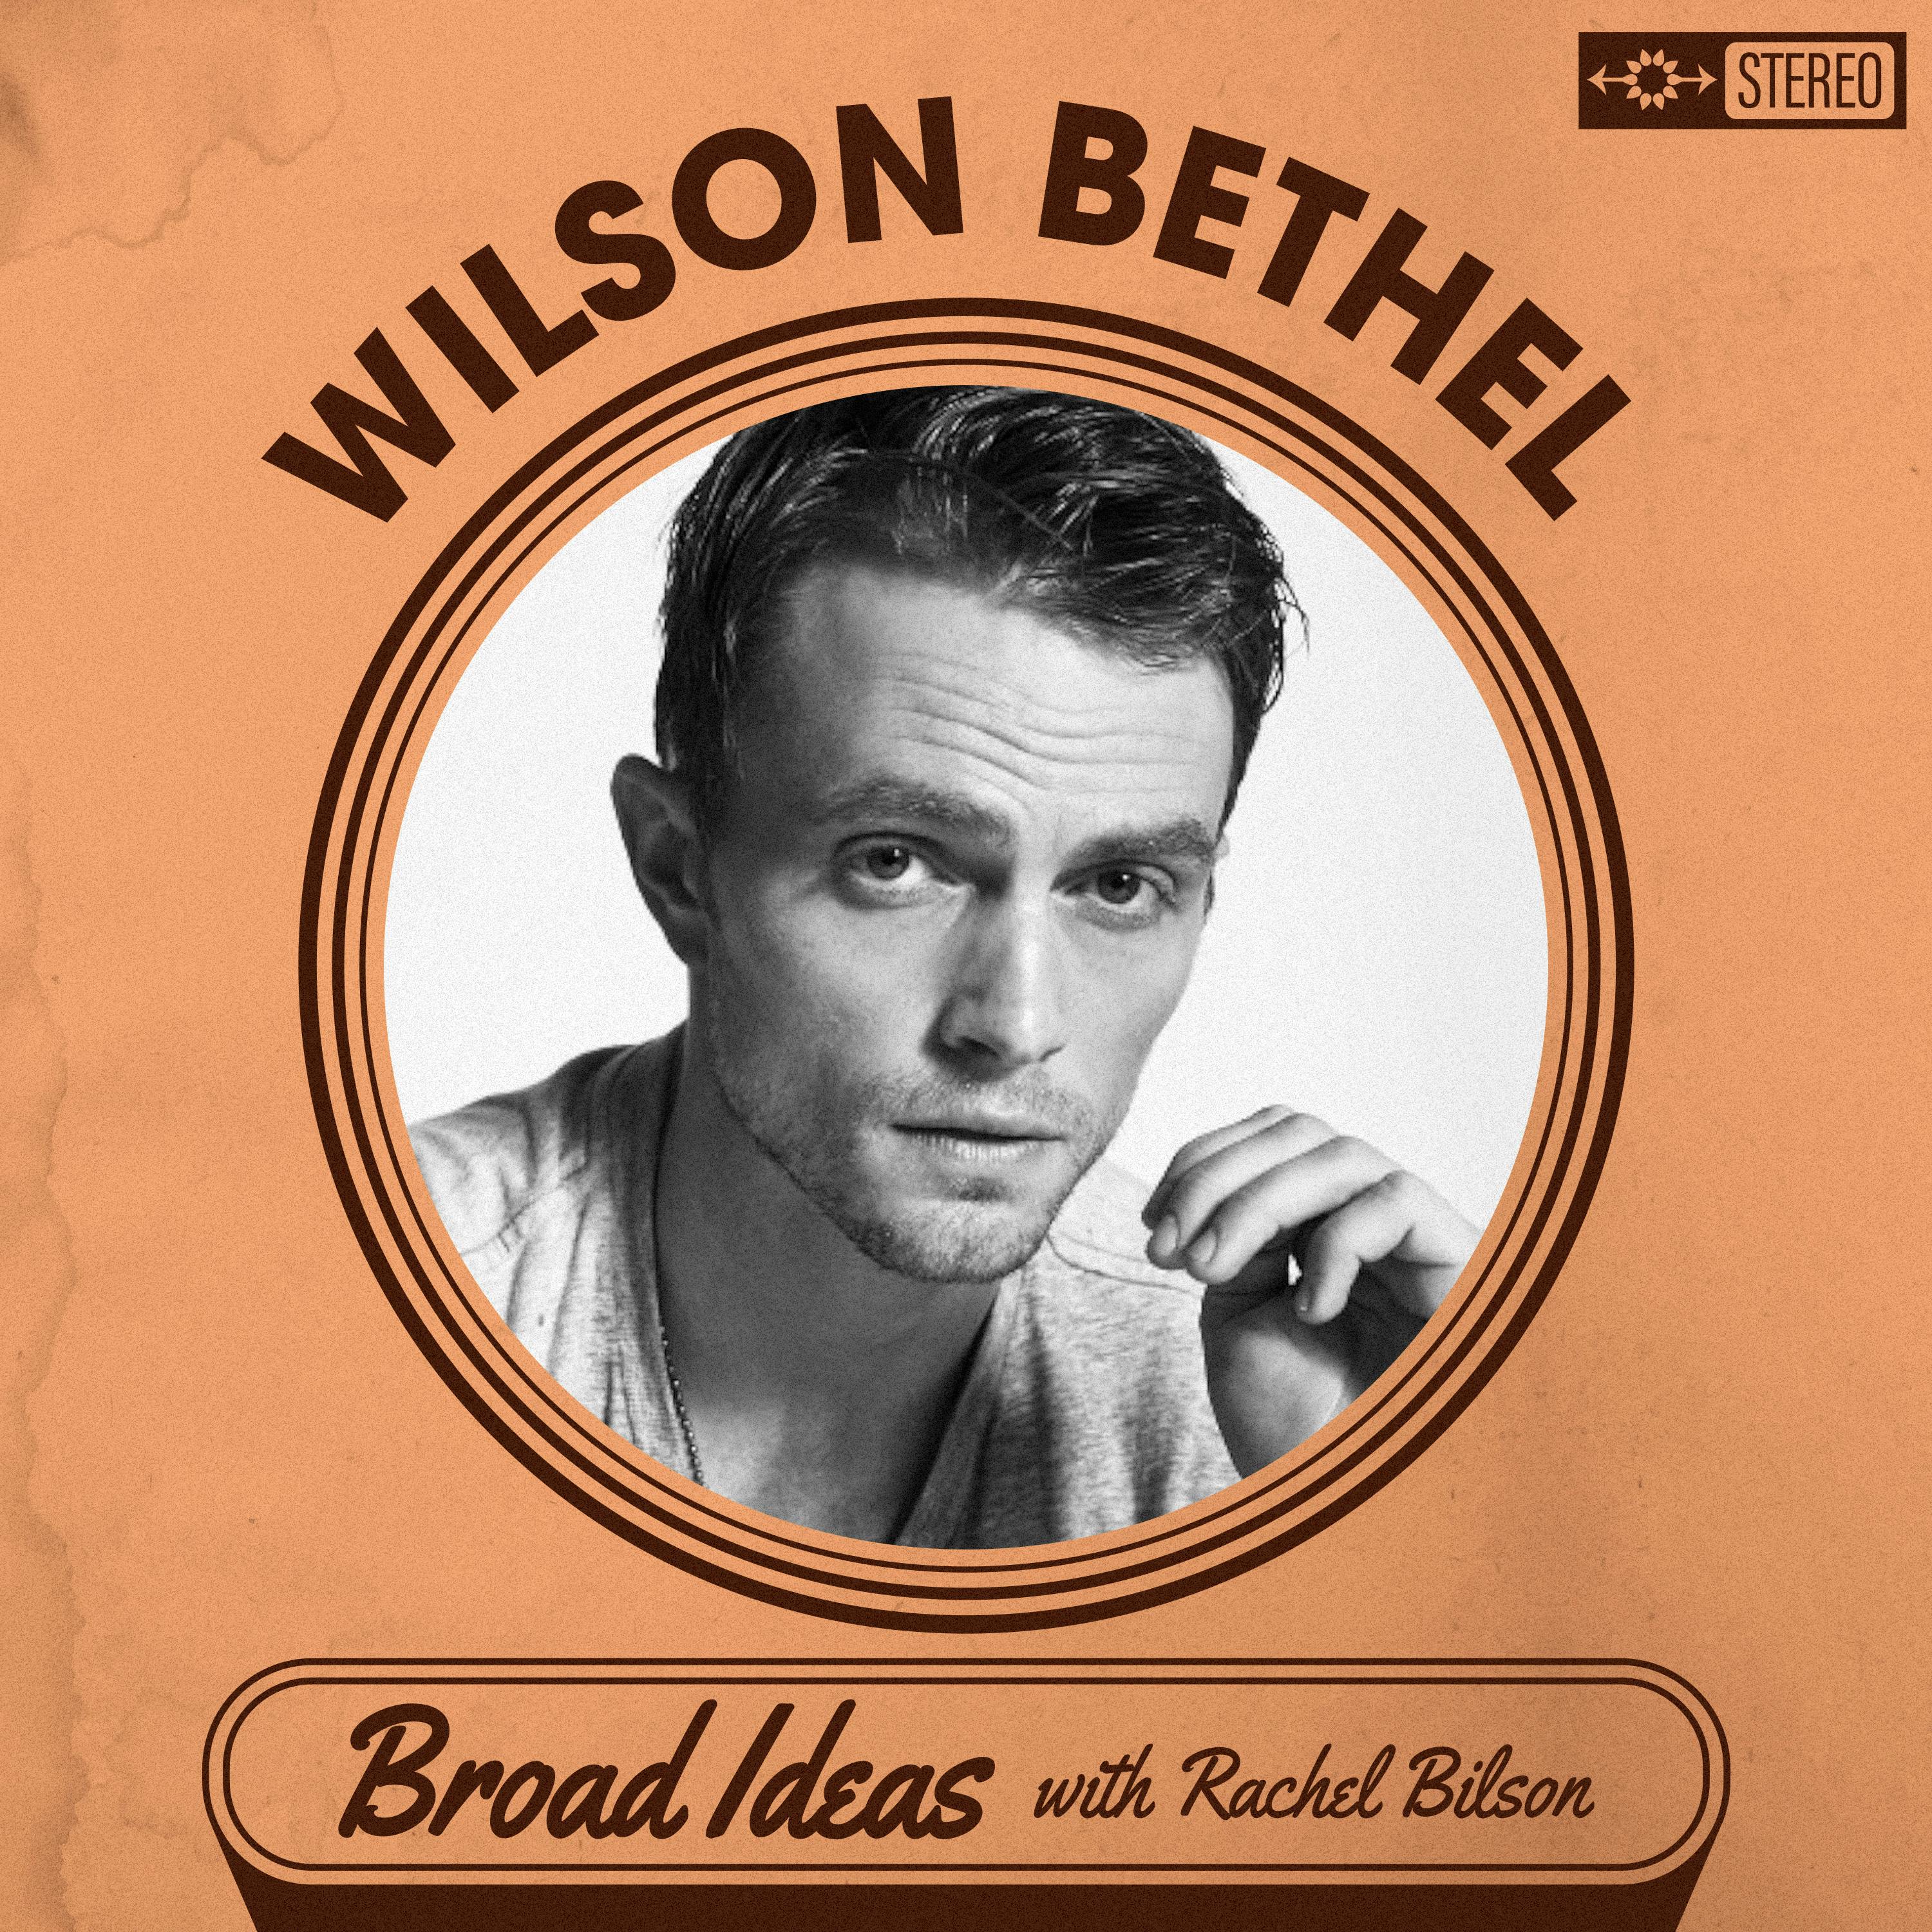 Wilson Bethel on Selfishness, Fear, and Getting Fired from The O.C.